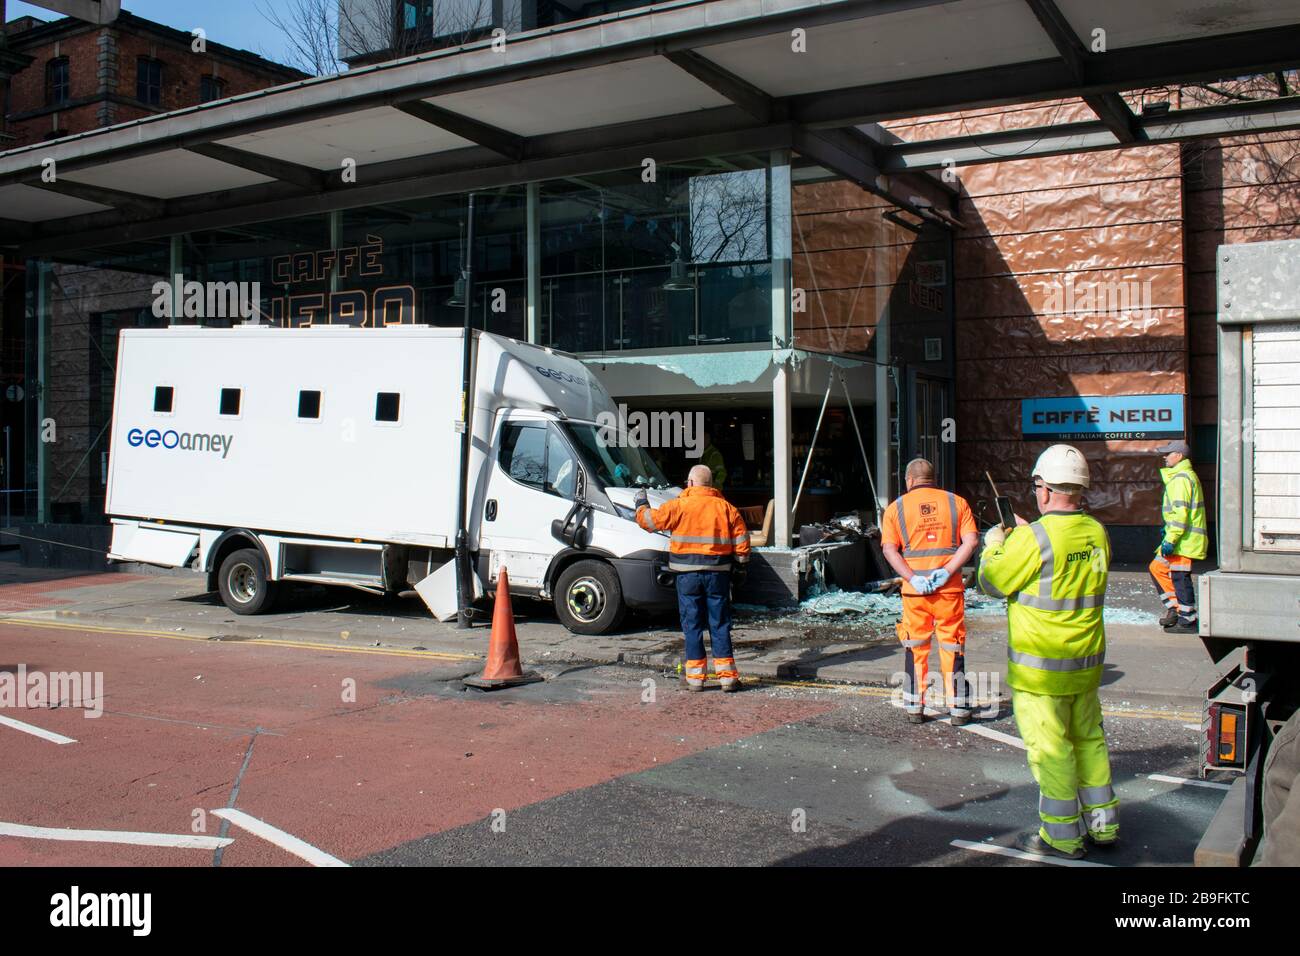 A Geoamey prisoner escort van in collision with locked down Cafe Nero frontage on Portland Street central Manchester UK with recovery personnel. Stock Photo